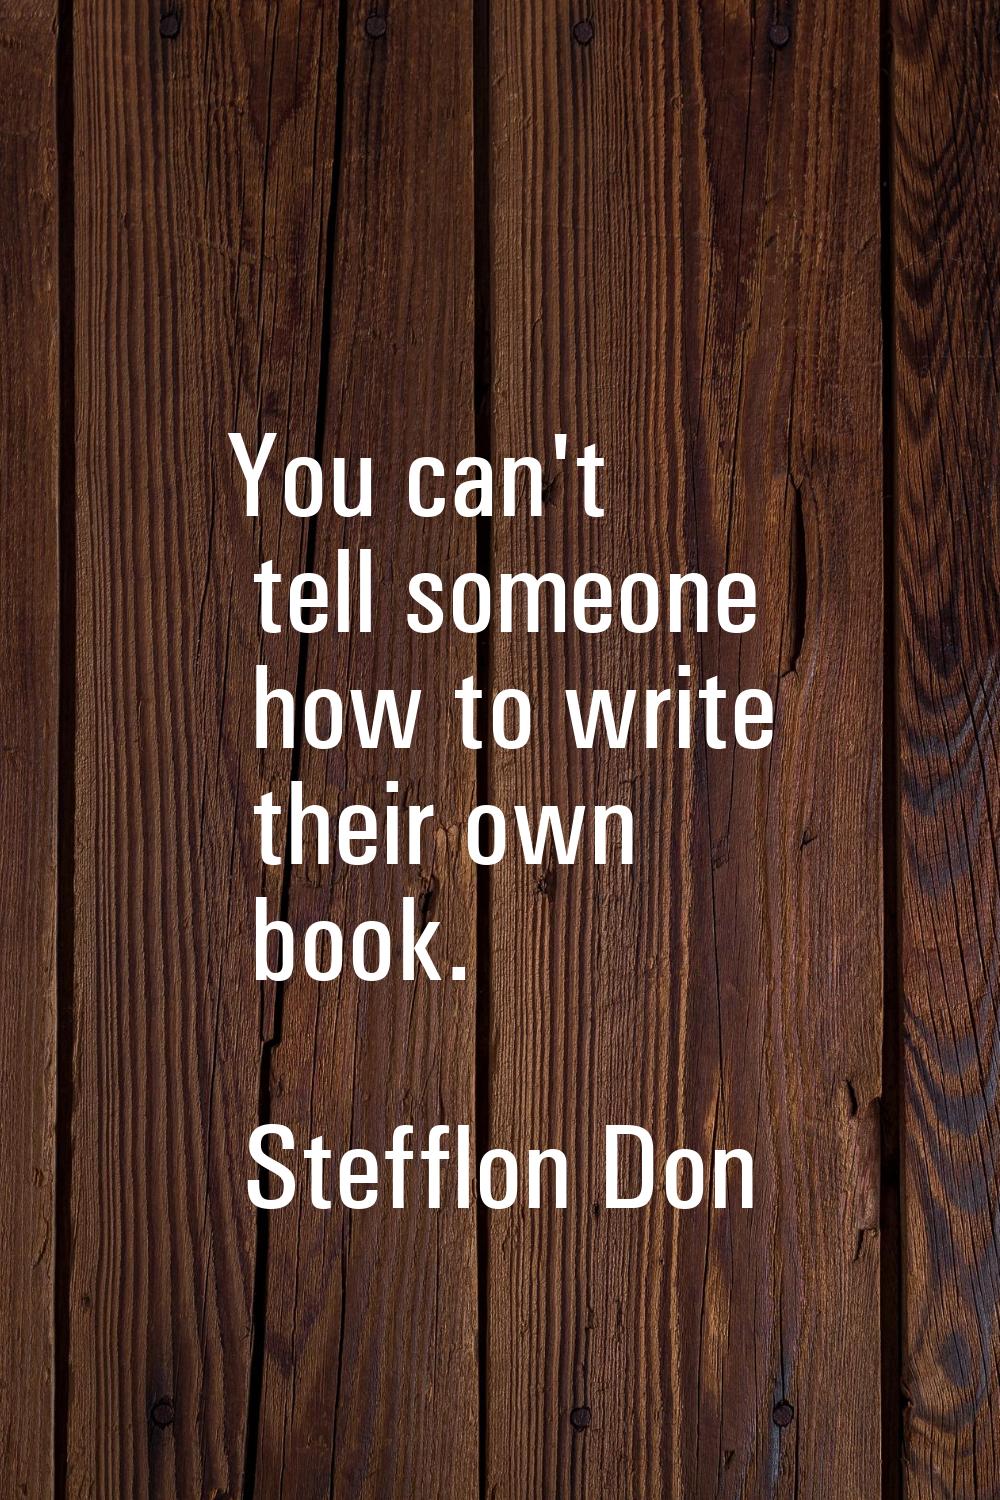 You can't tell someone how to write their own book.